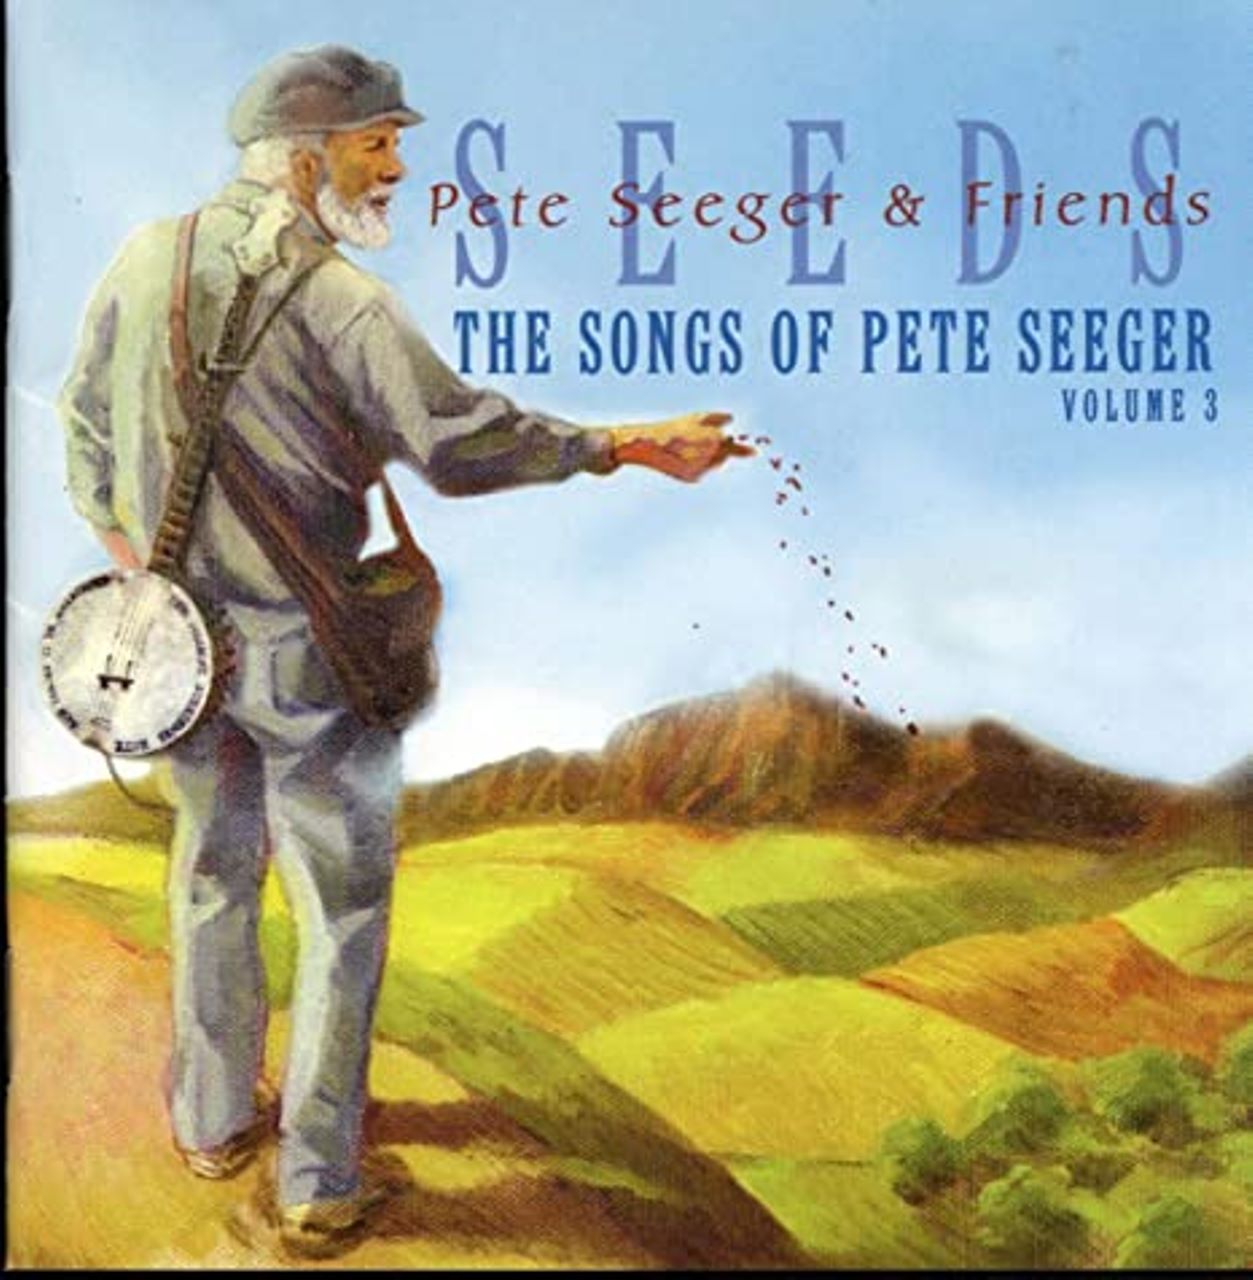 Pete Seeger & Friends – Seeds The Songs Of Pete Seeger, Vol. 3 cover album